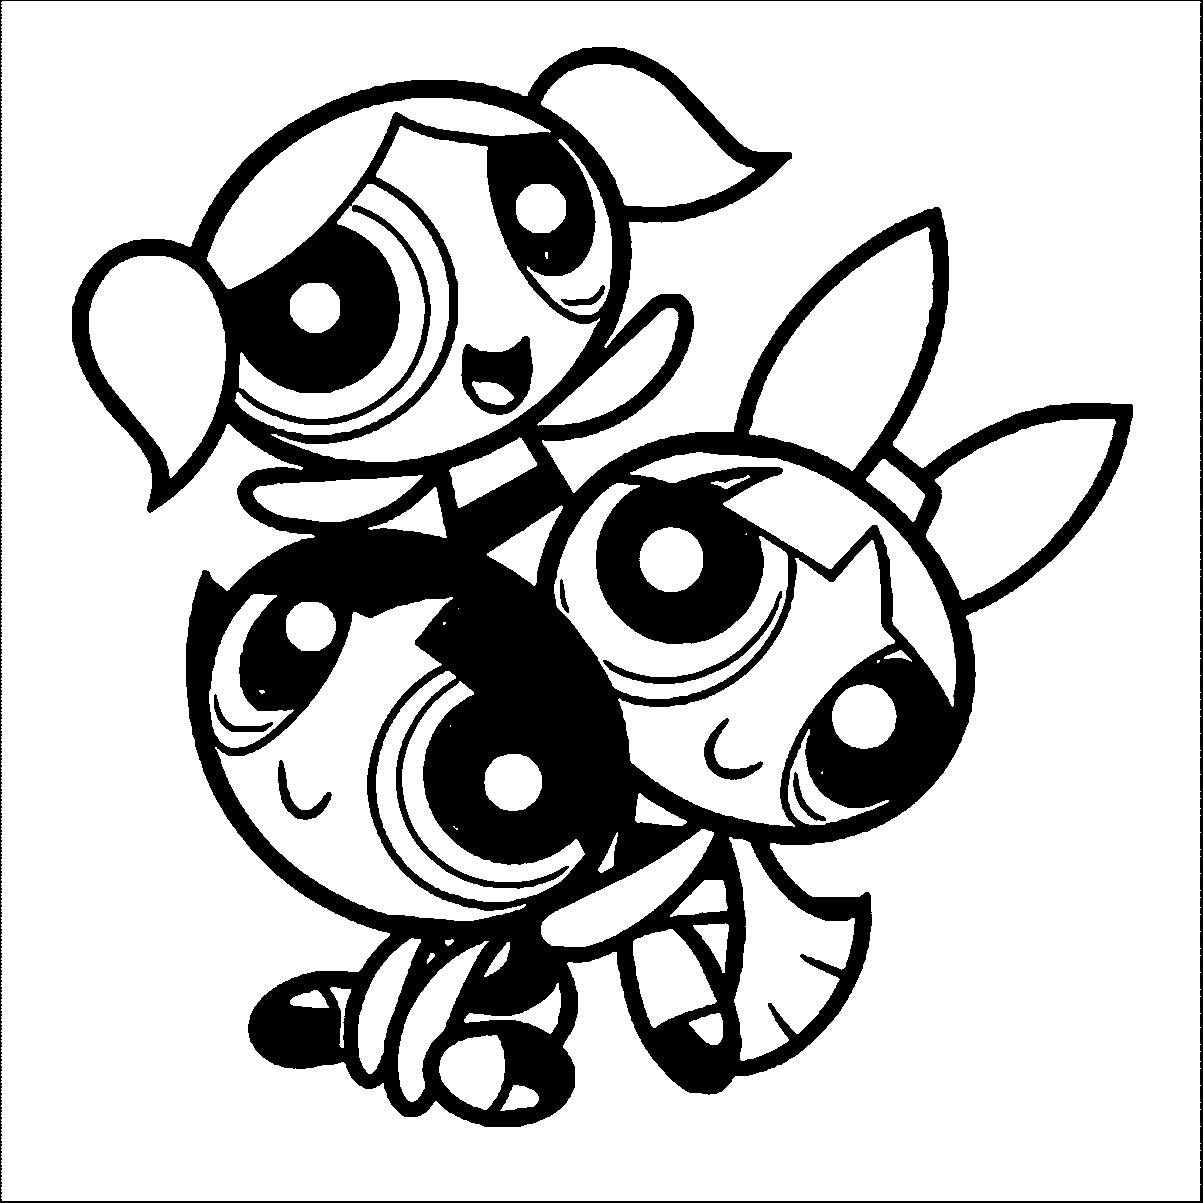 The Powerpuff Girls Coloring Book
 Powerpuff Girls Coloring Pages